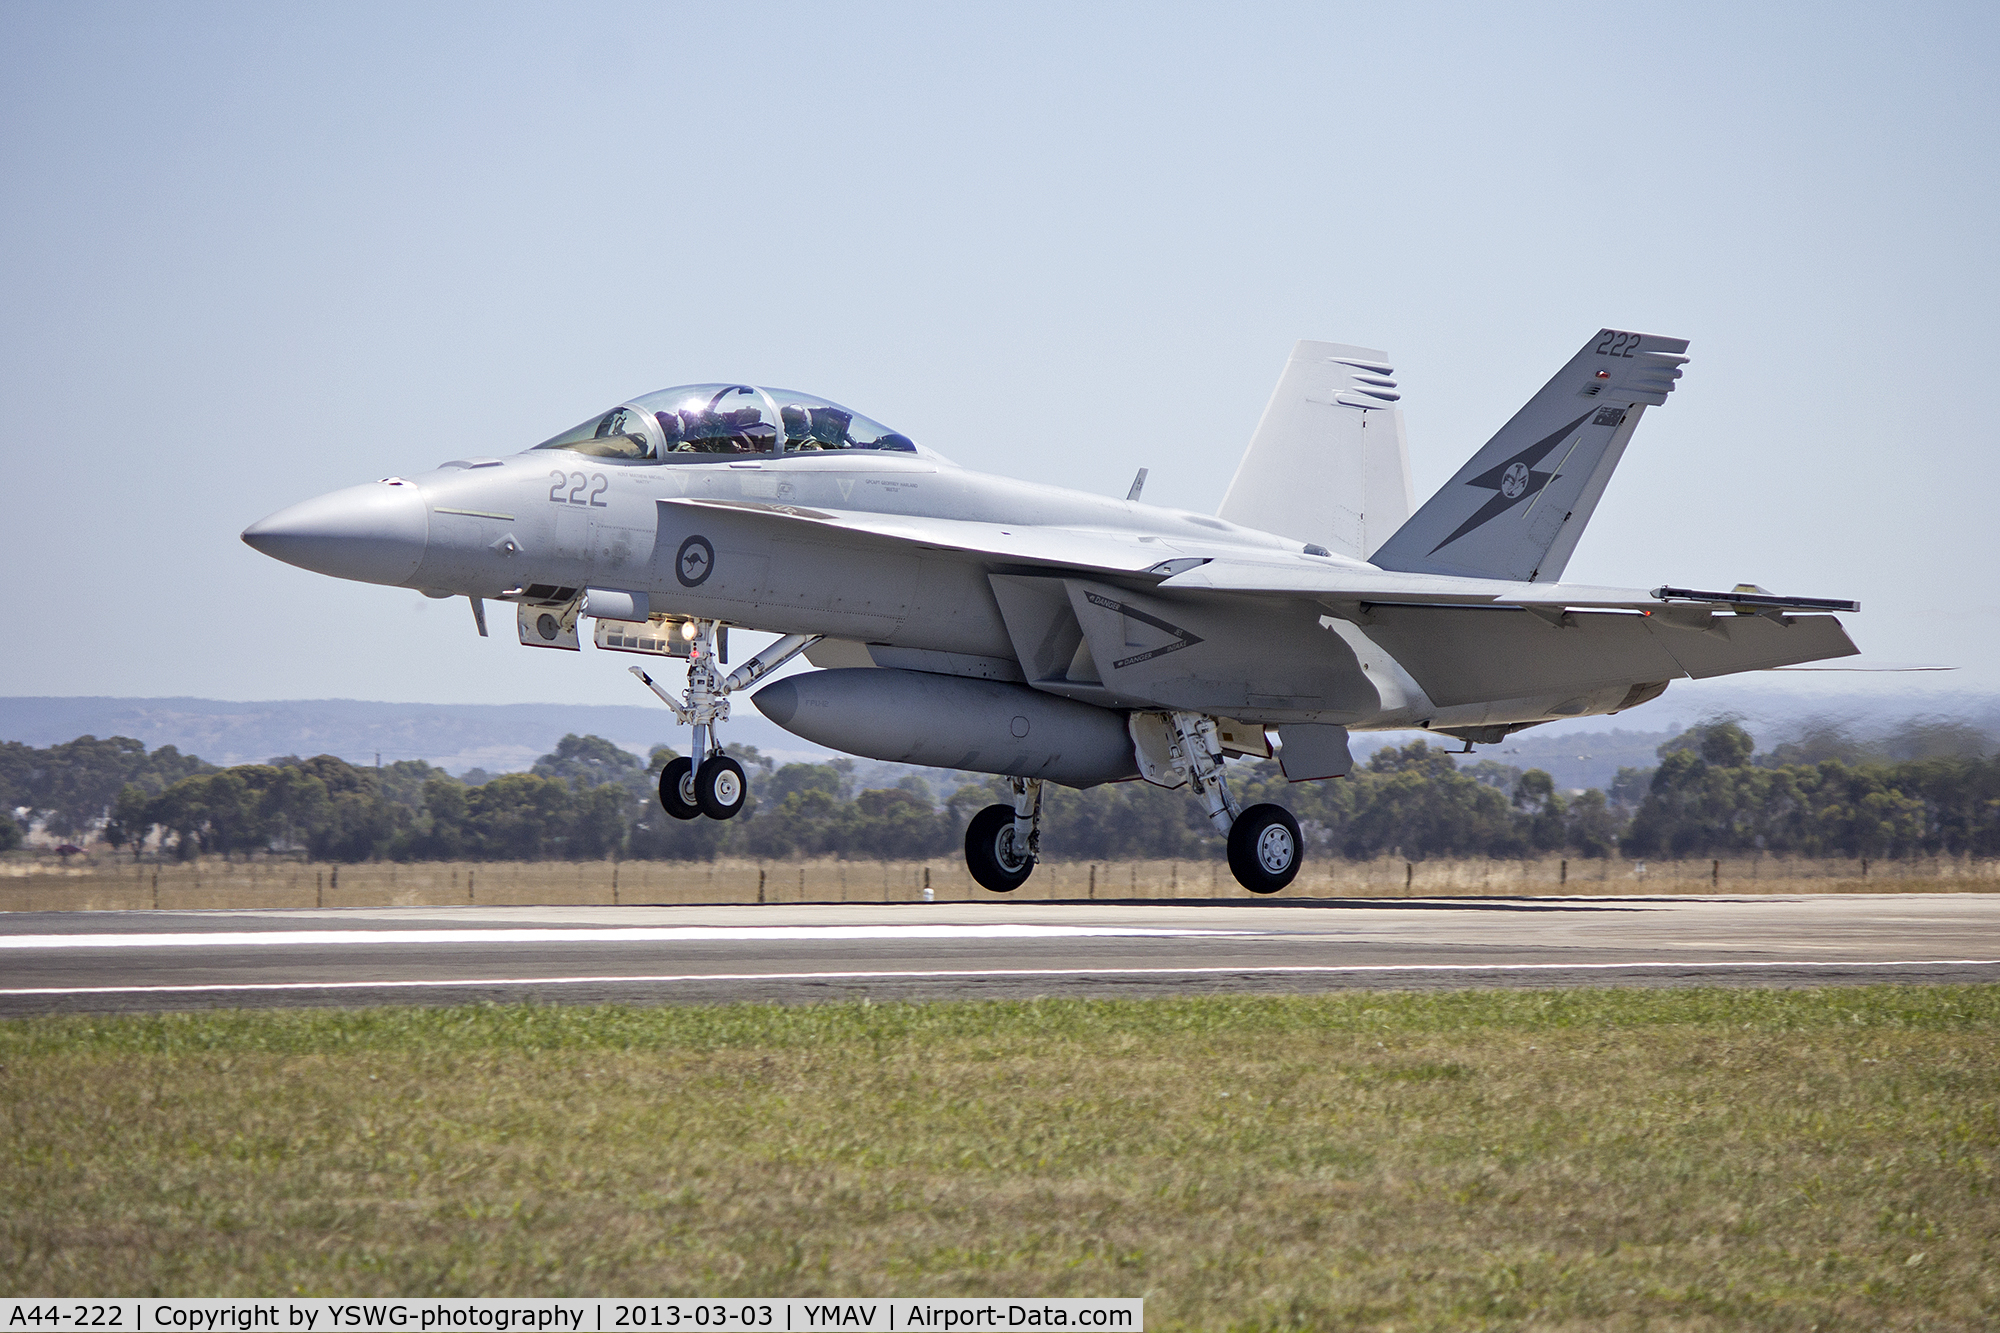 A44-222, 2011 Boeing F/A-18F Super Hornet C/N AF-22, RAAF F/A 18F Super Hornet landing after an air display during the 2013 Avalon Airshow.